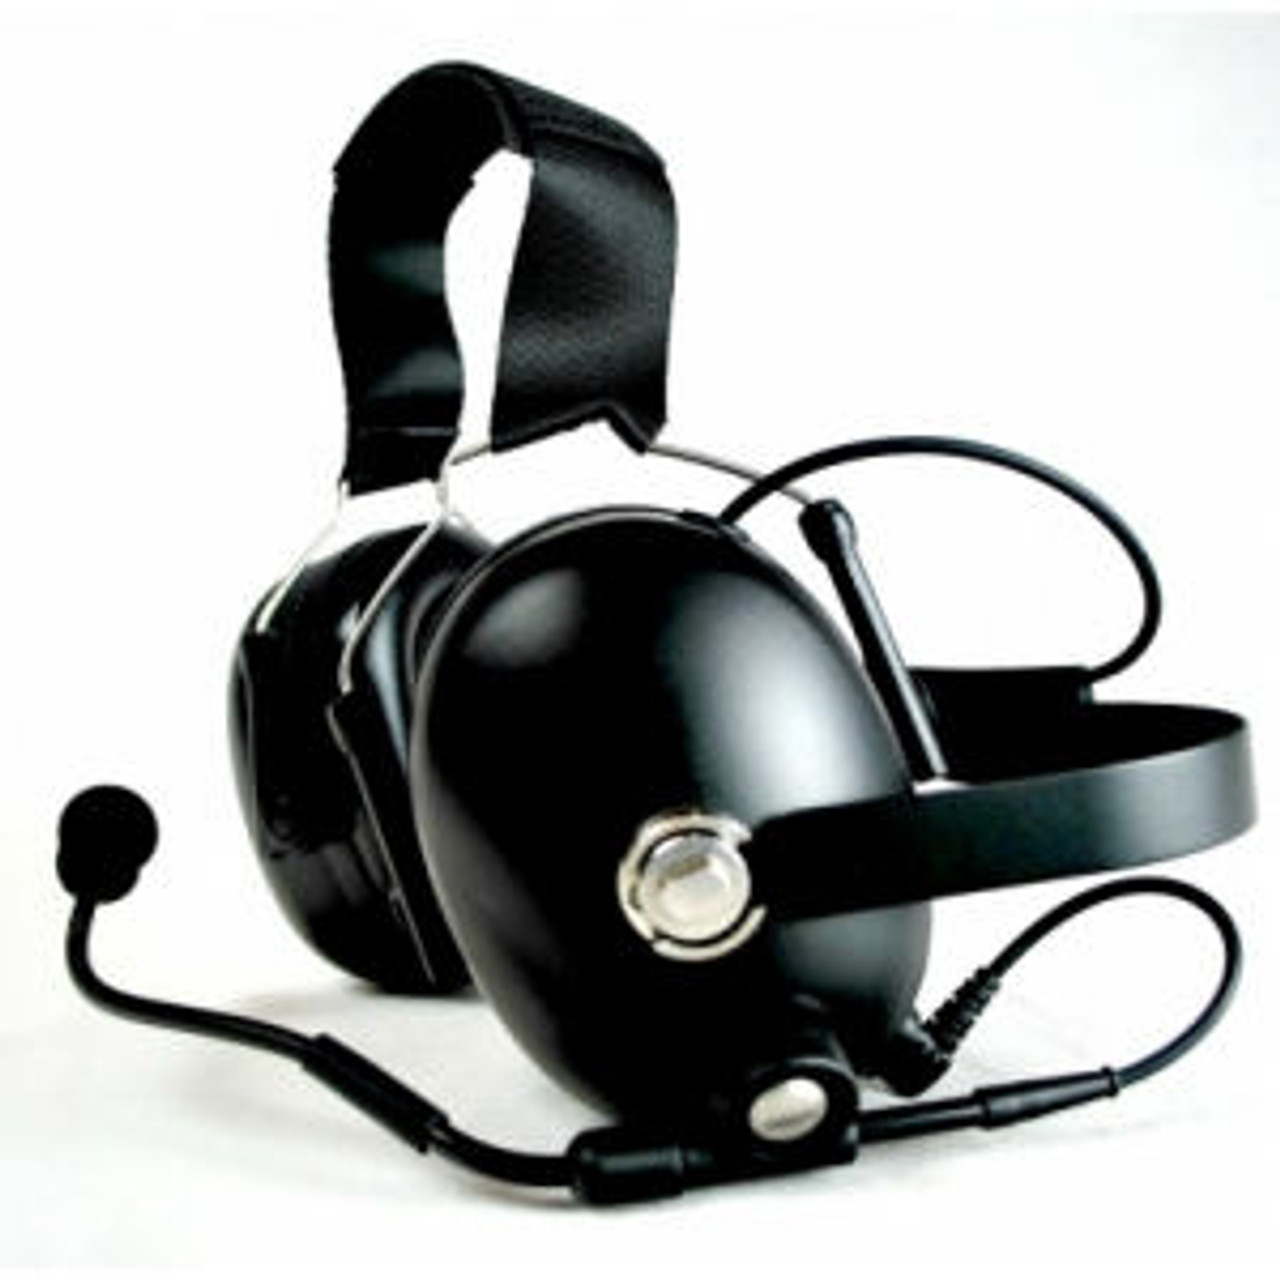 EF Johnson Multi-Net Ascend Noise Canceling Double Muff Behind The Head Headset